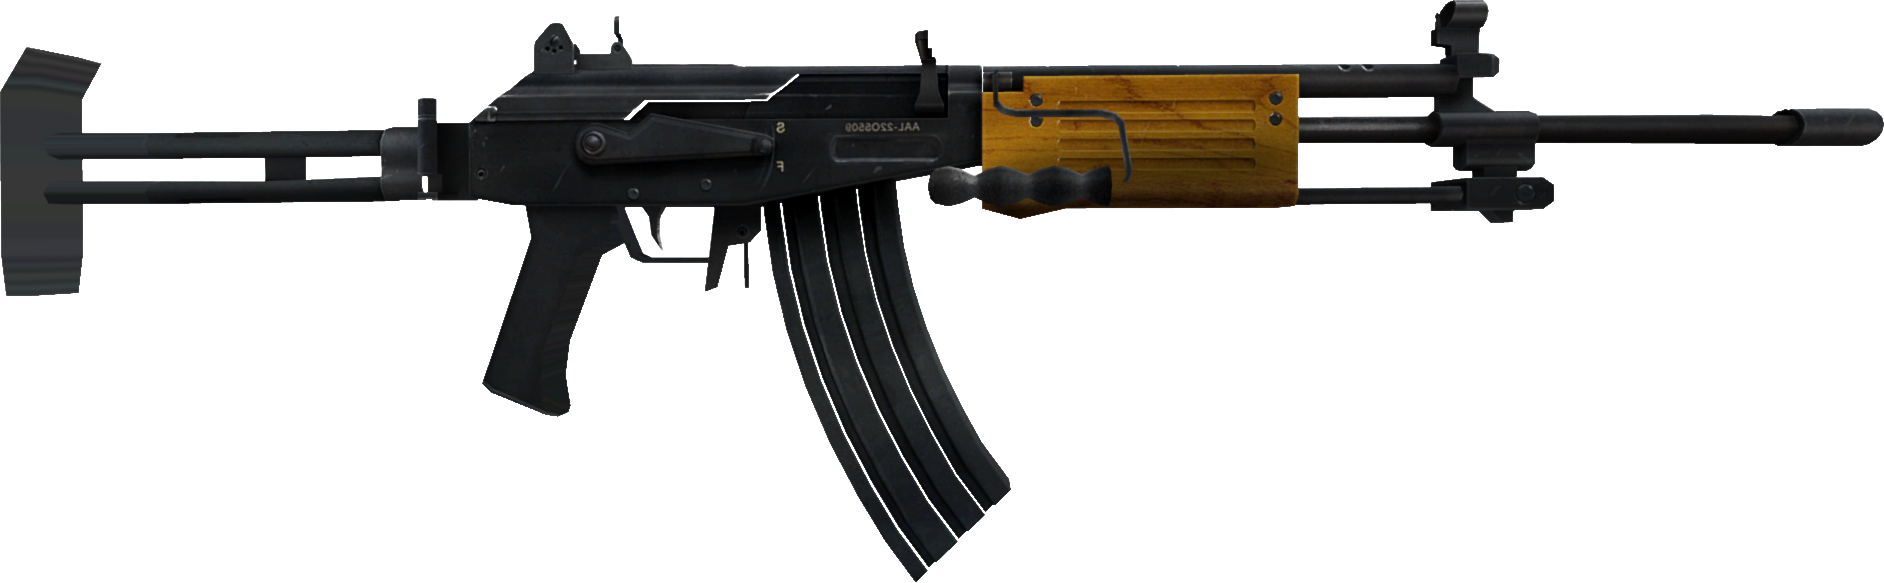 Image - Zewikia weapon assaultrifle galil css.png  Zombie 